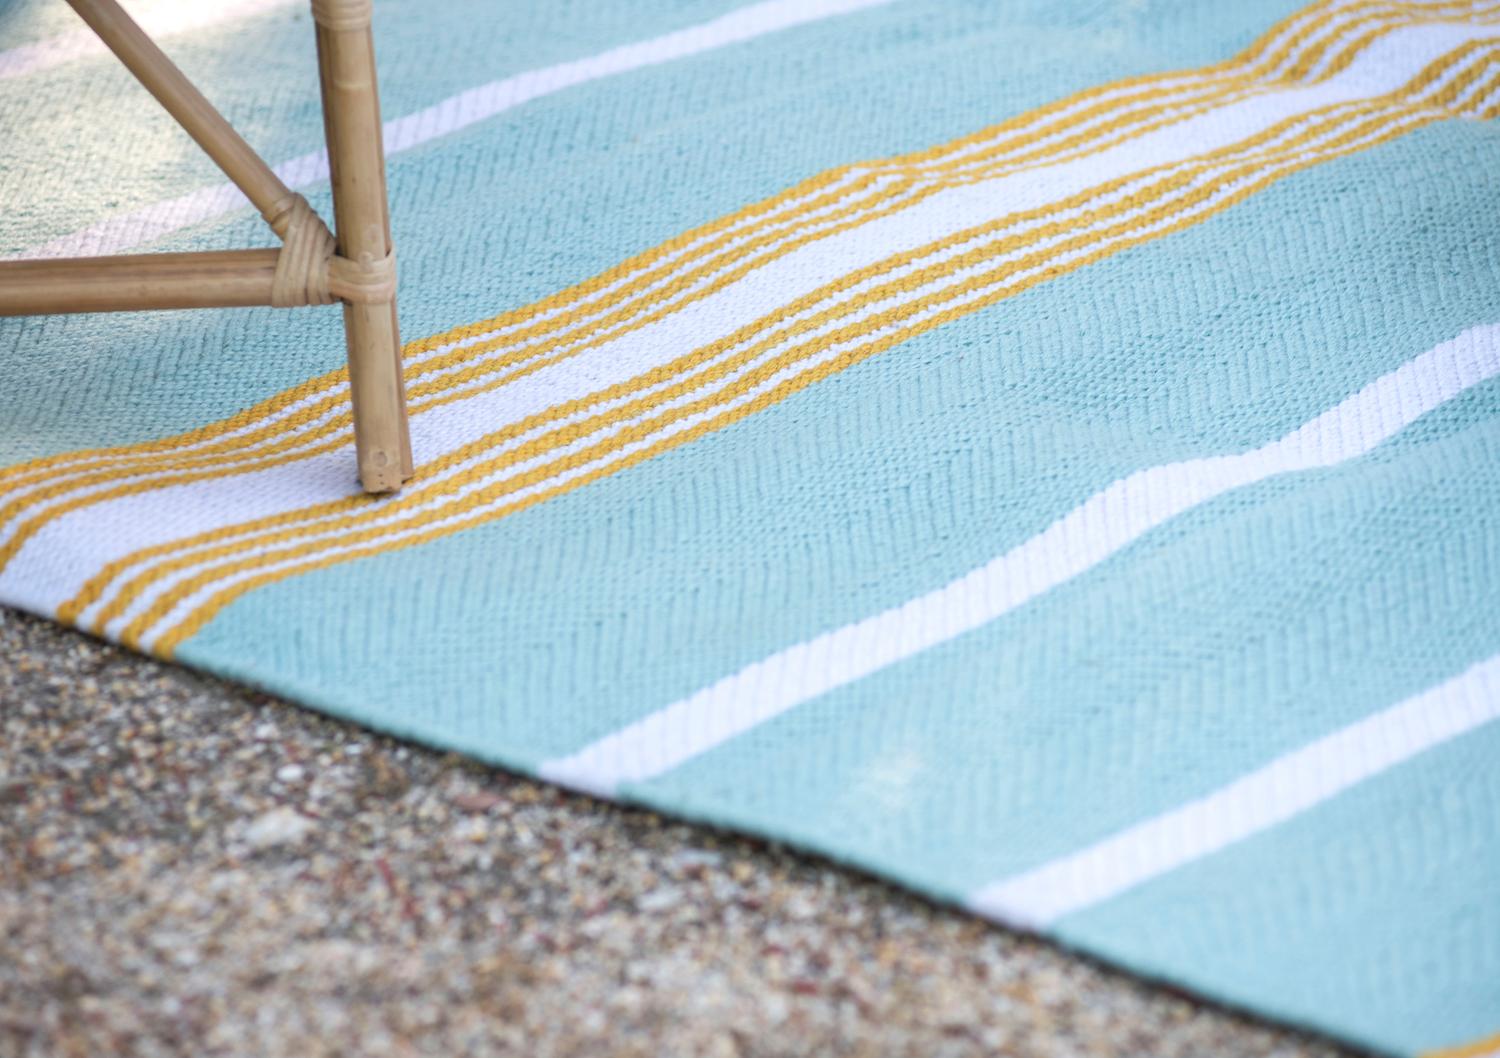 Acrylic Modern Handwoven Polypropylene Outdoor Rug Carpet Mustard Turquoise Stripes For Sale